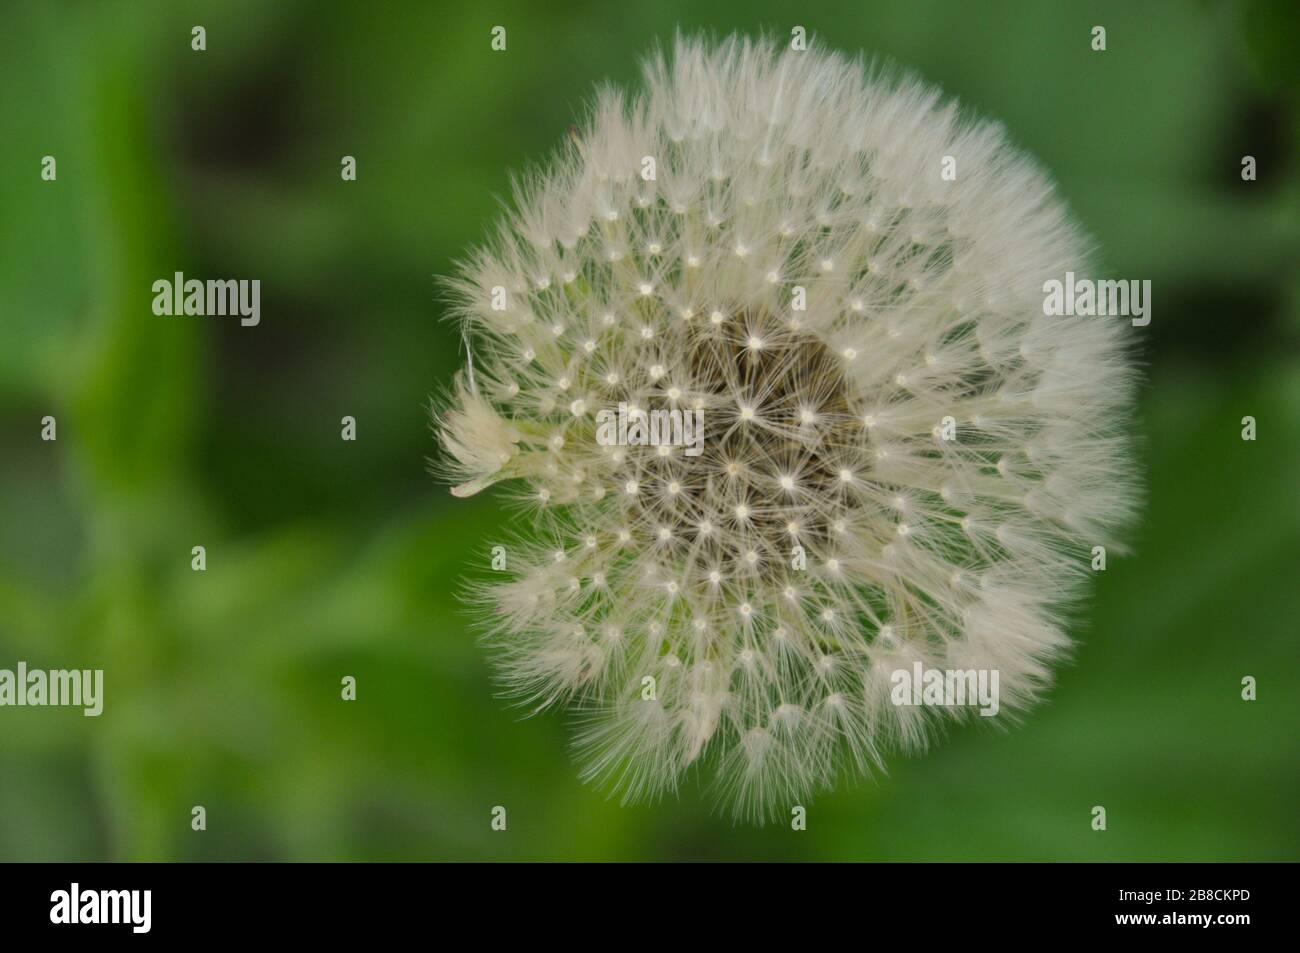 Fluffy dandelion in the wind close-up view. Springtime. Stock Photo